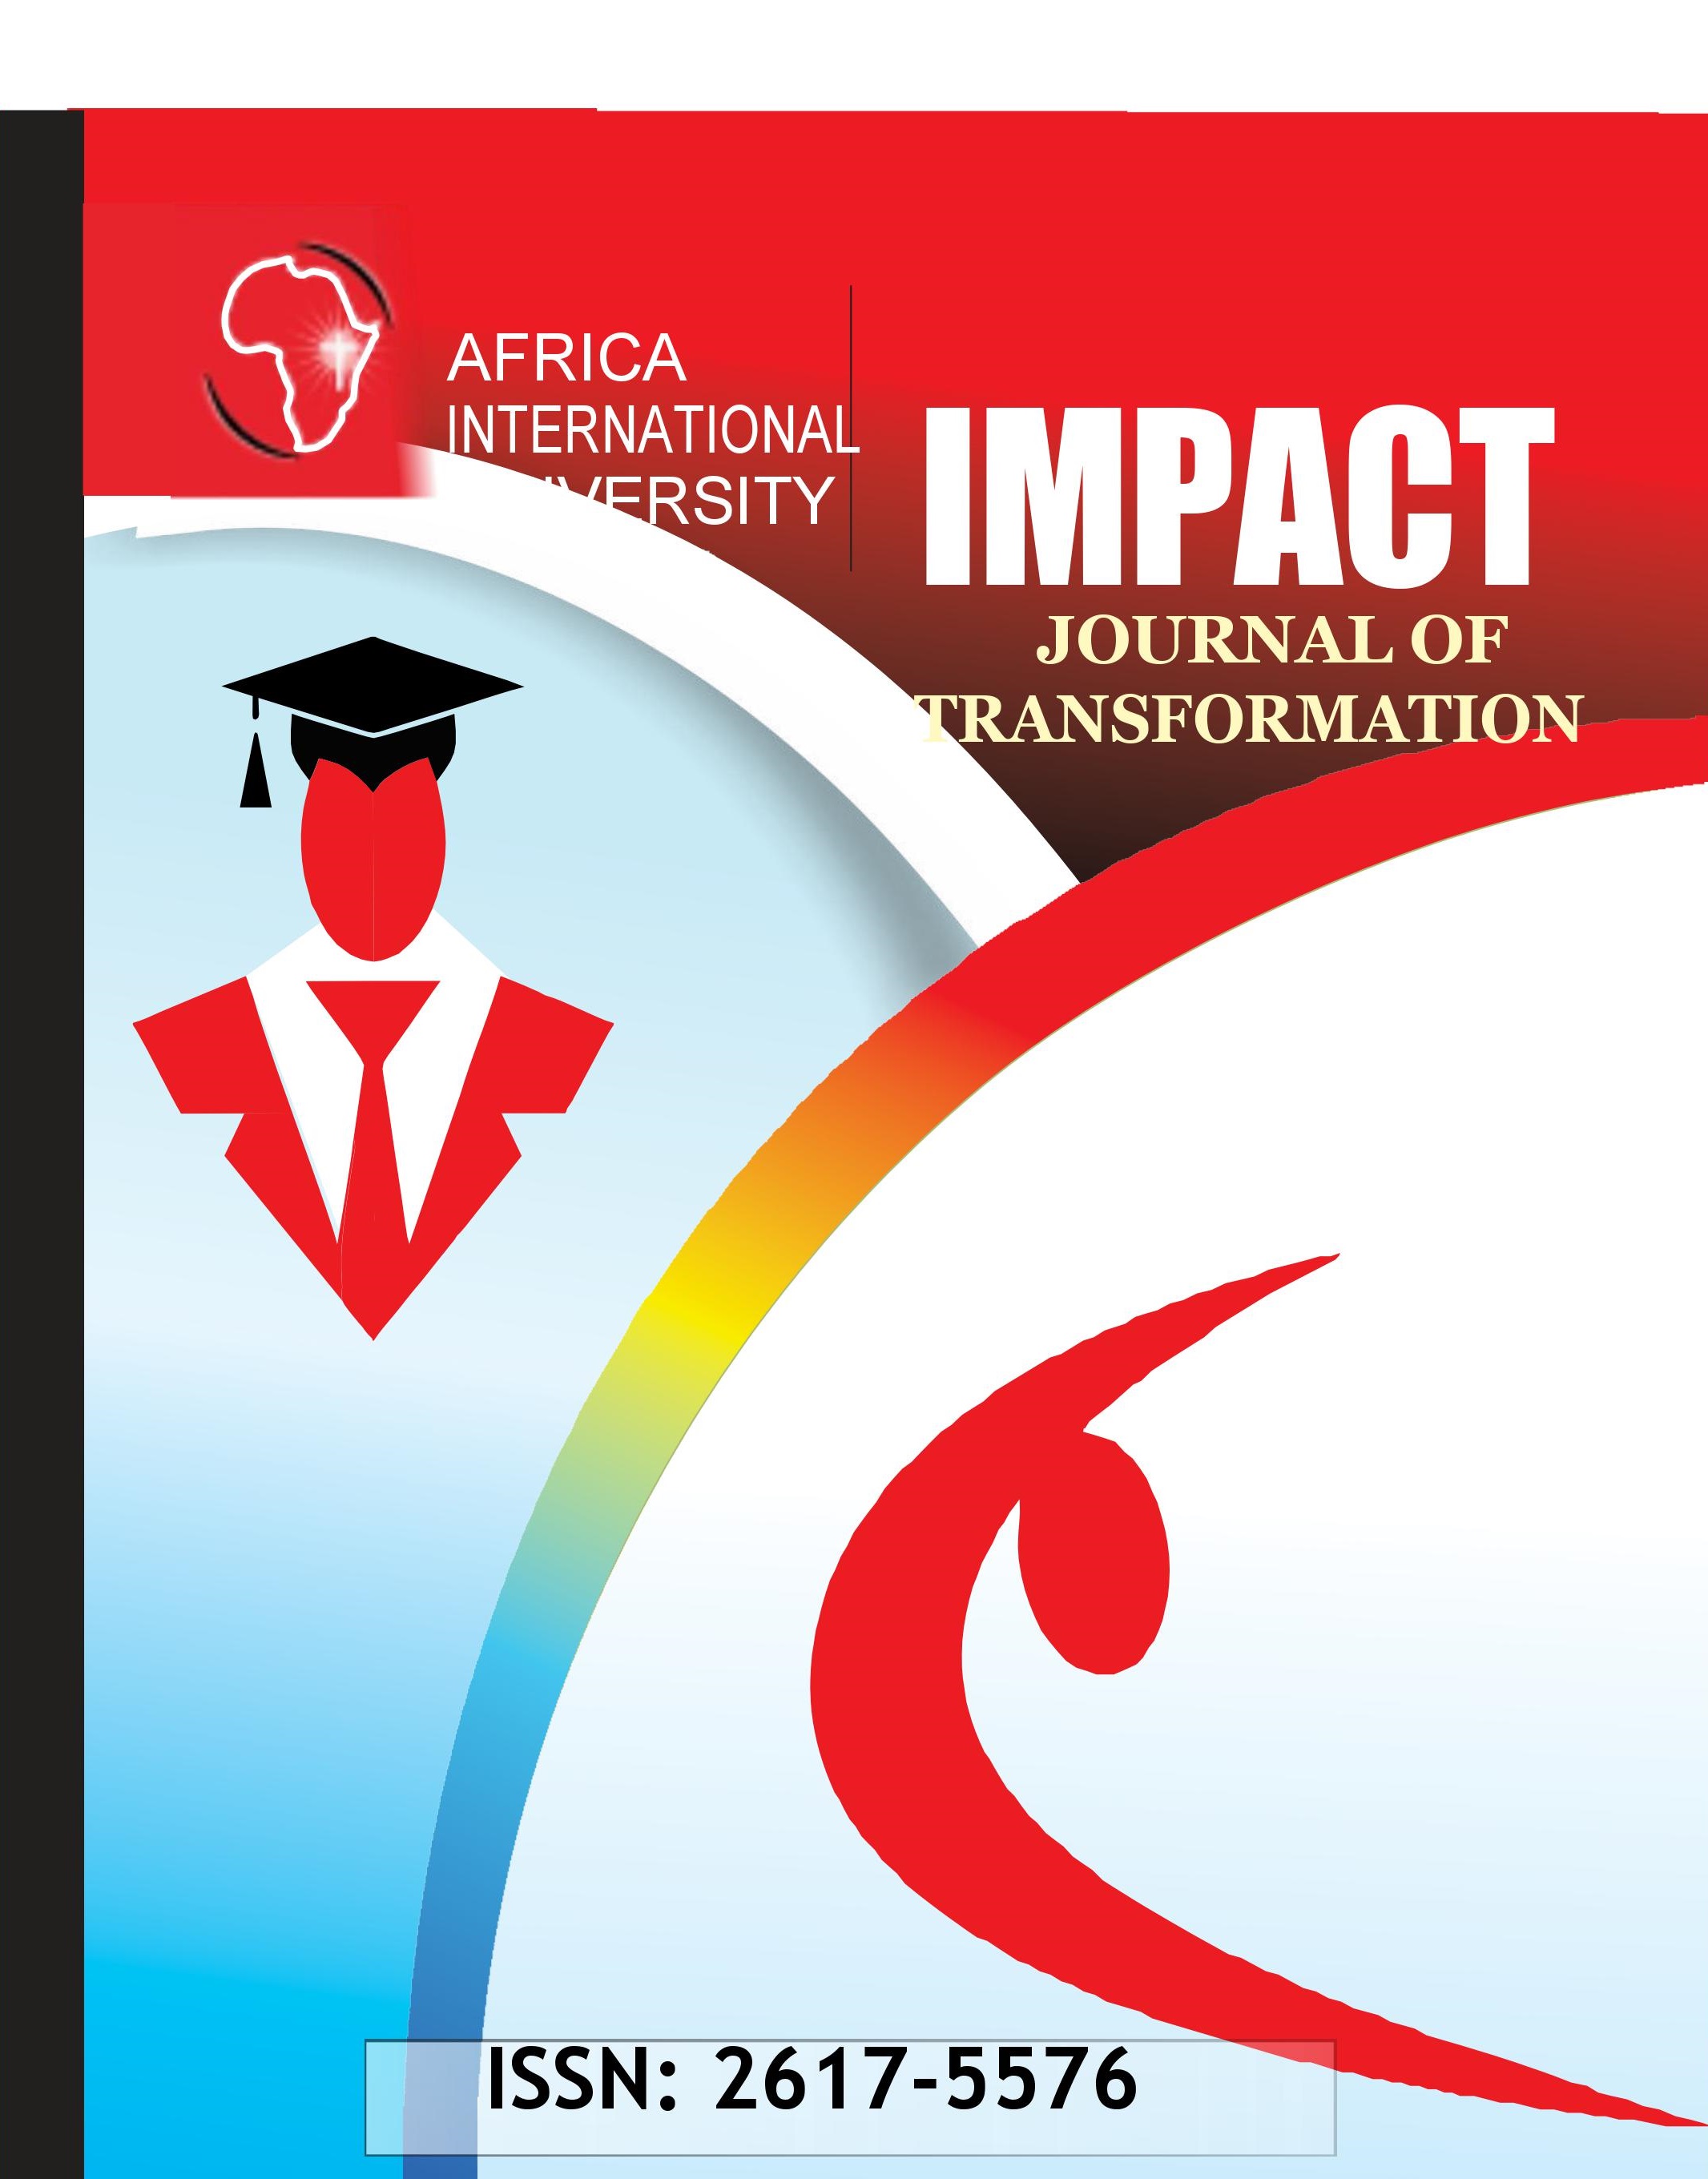 					View Vol. 3 No. 2 (2020): Impact: Journal of Transformation 
				